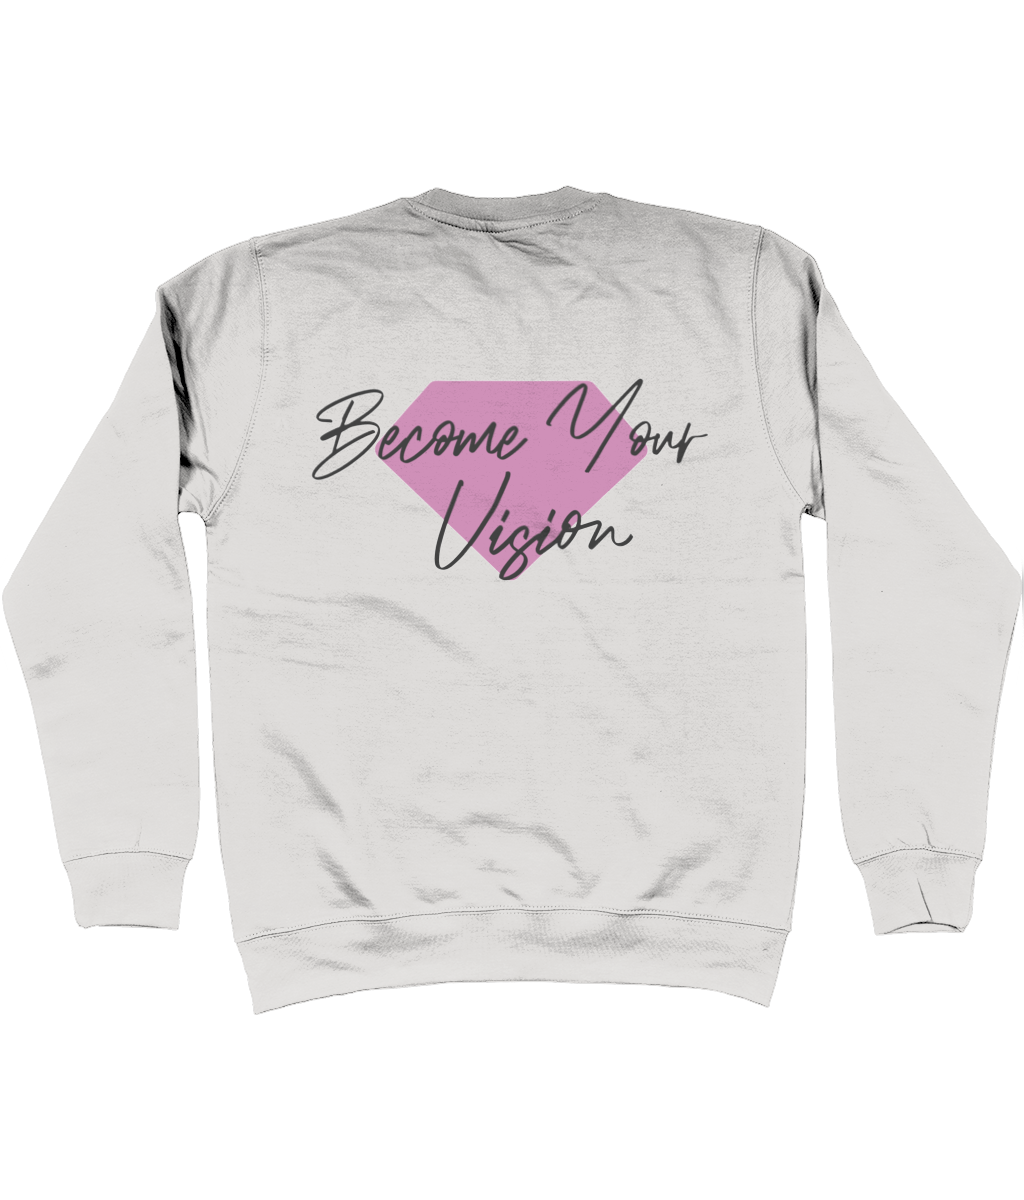 BECOME YOUR VISION SWEATSHIRT